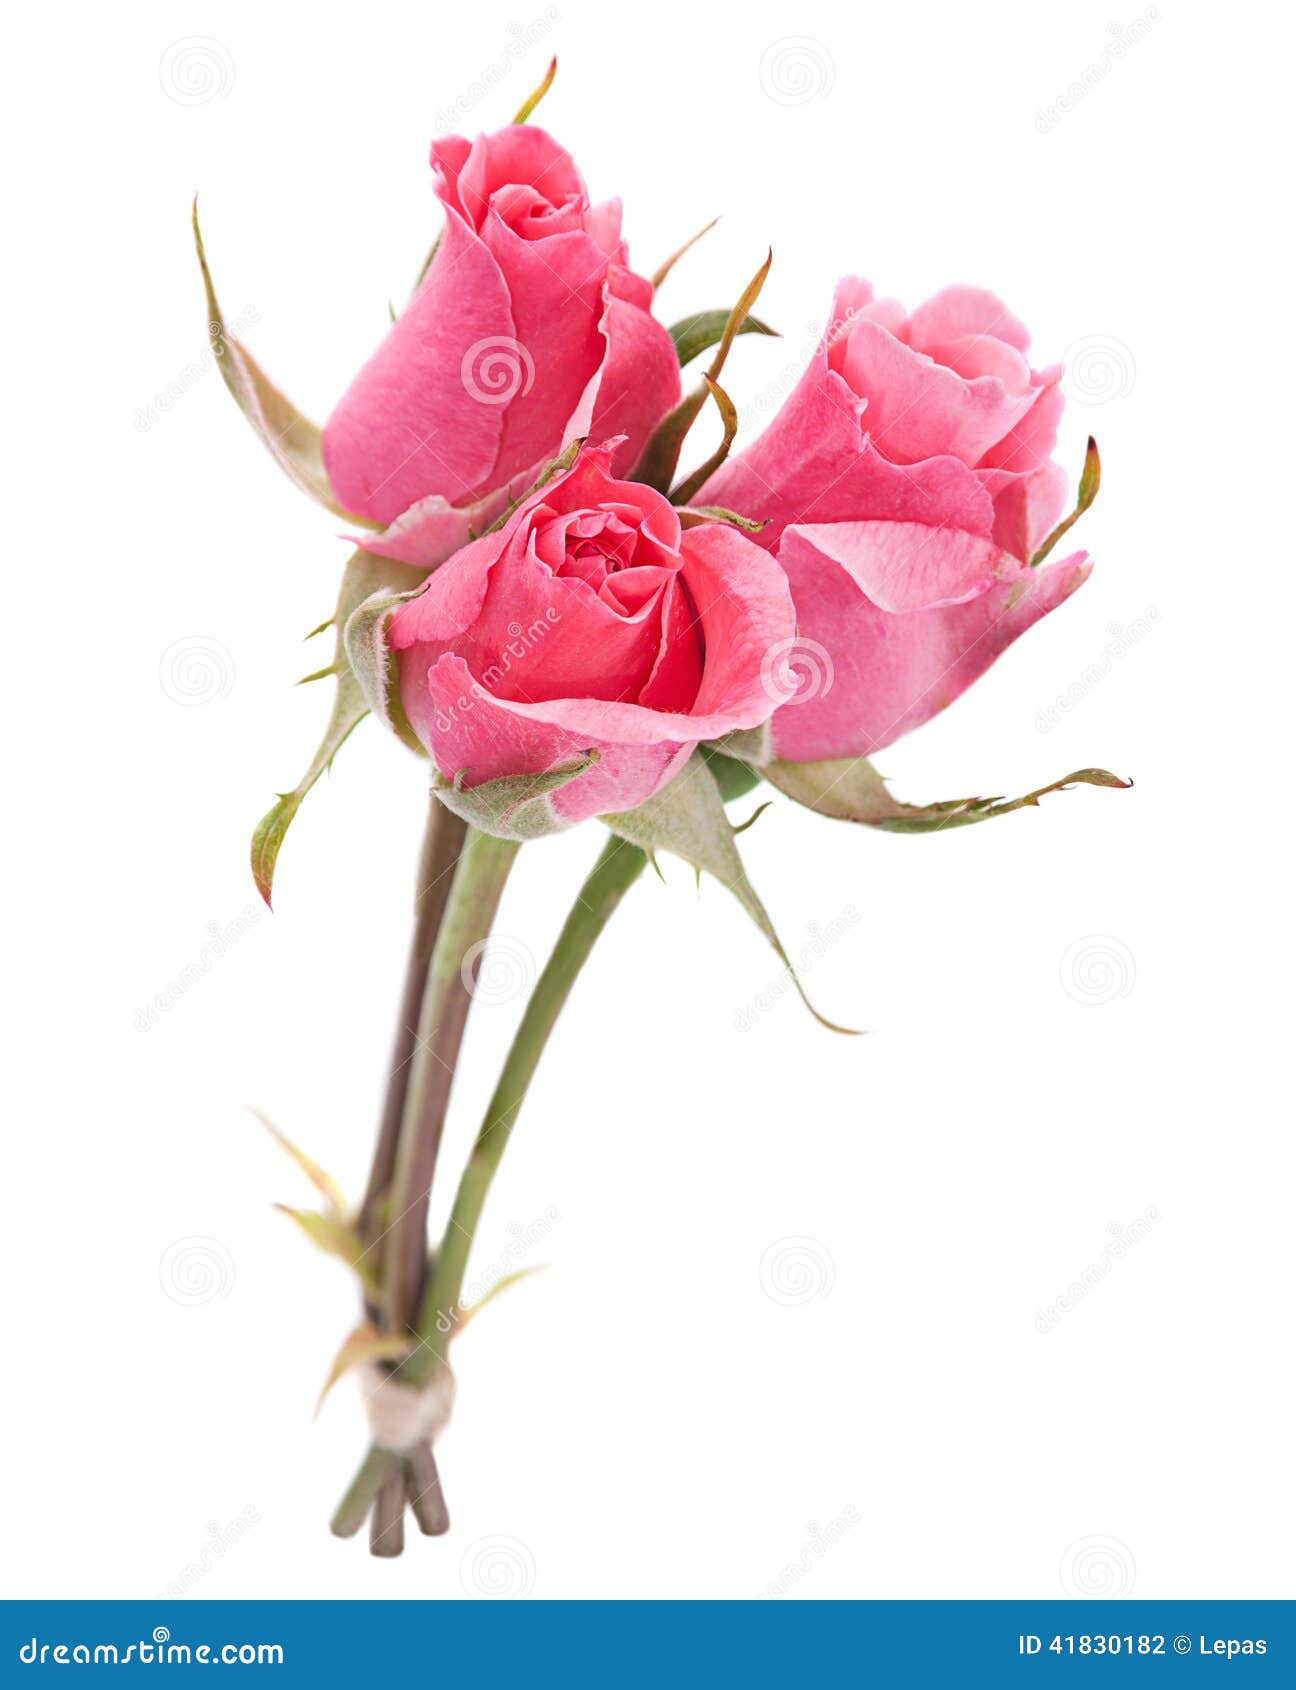 Pink rose head stock photo. Image of pink, valentine - 41830182